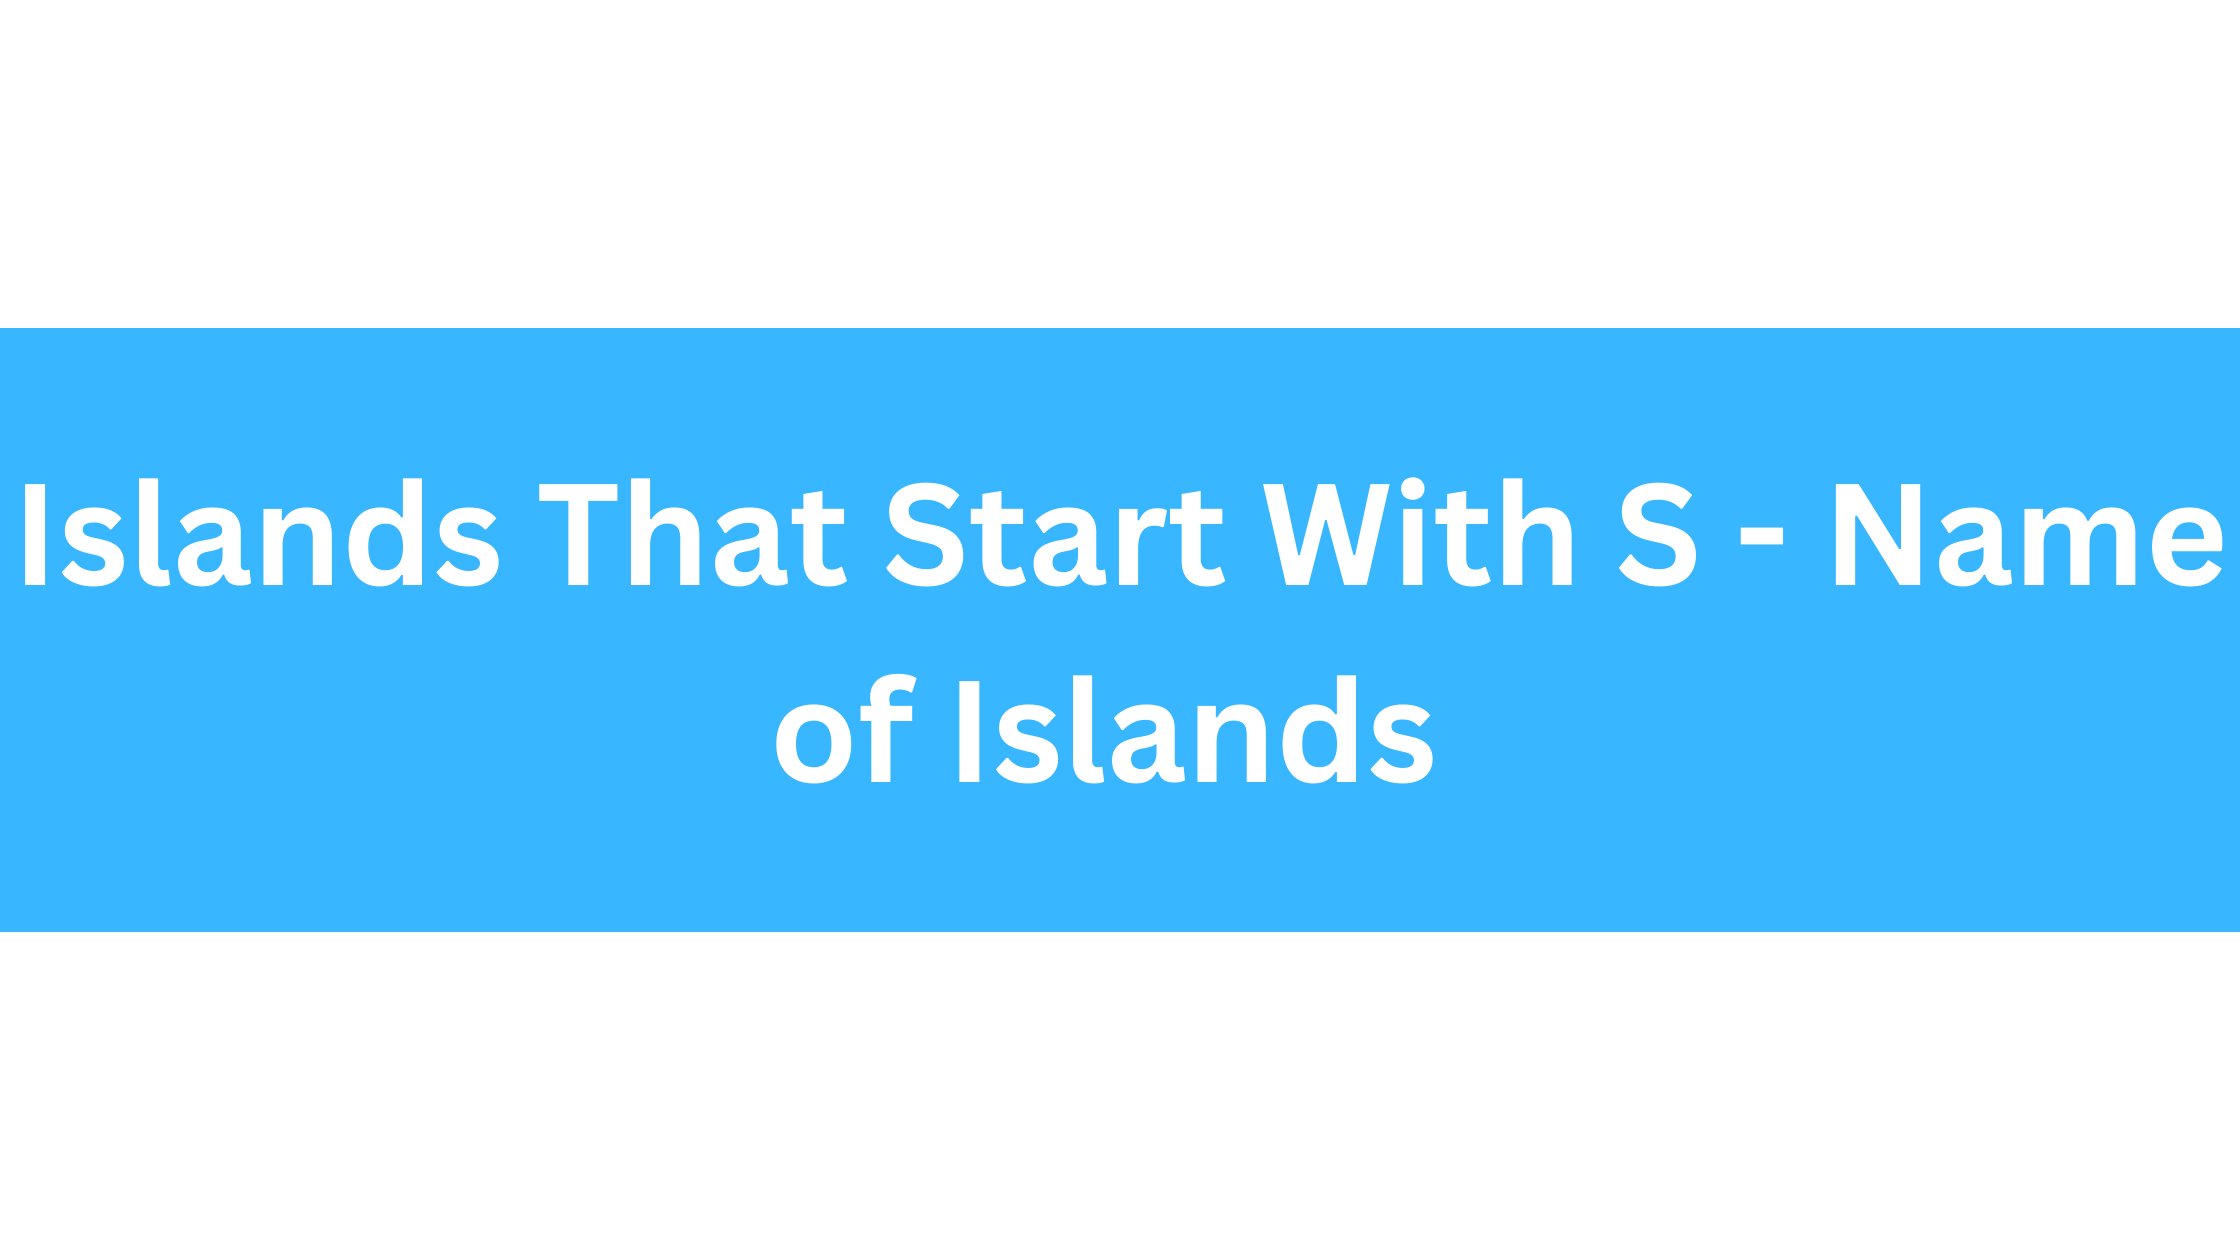 Islands That Start With S